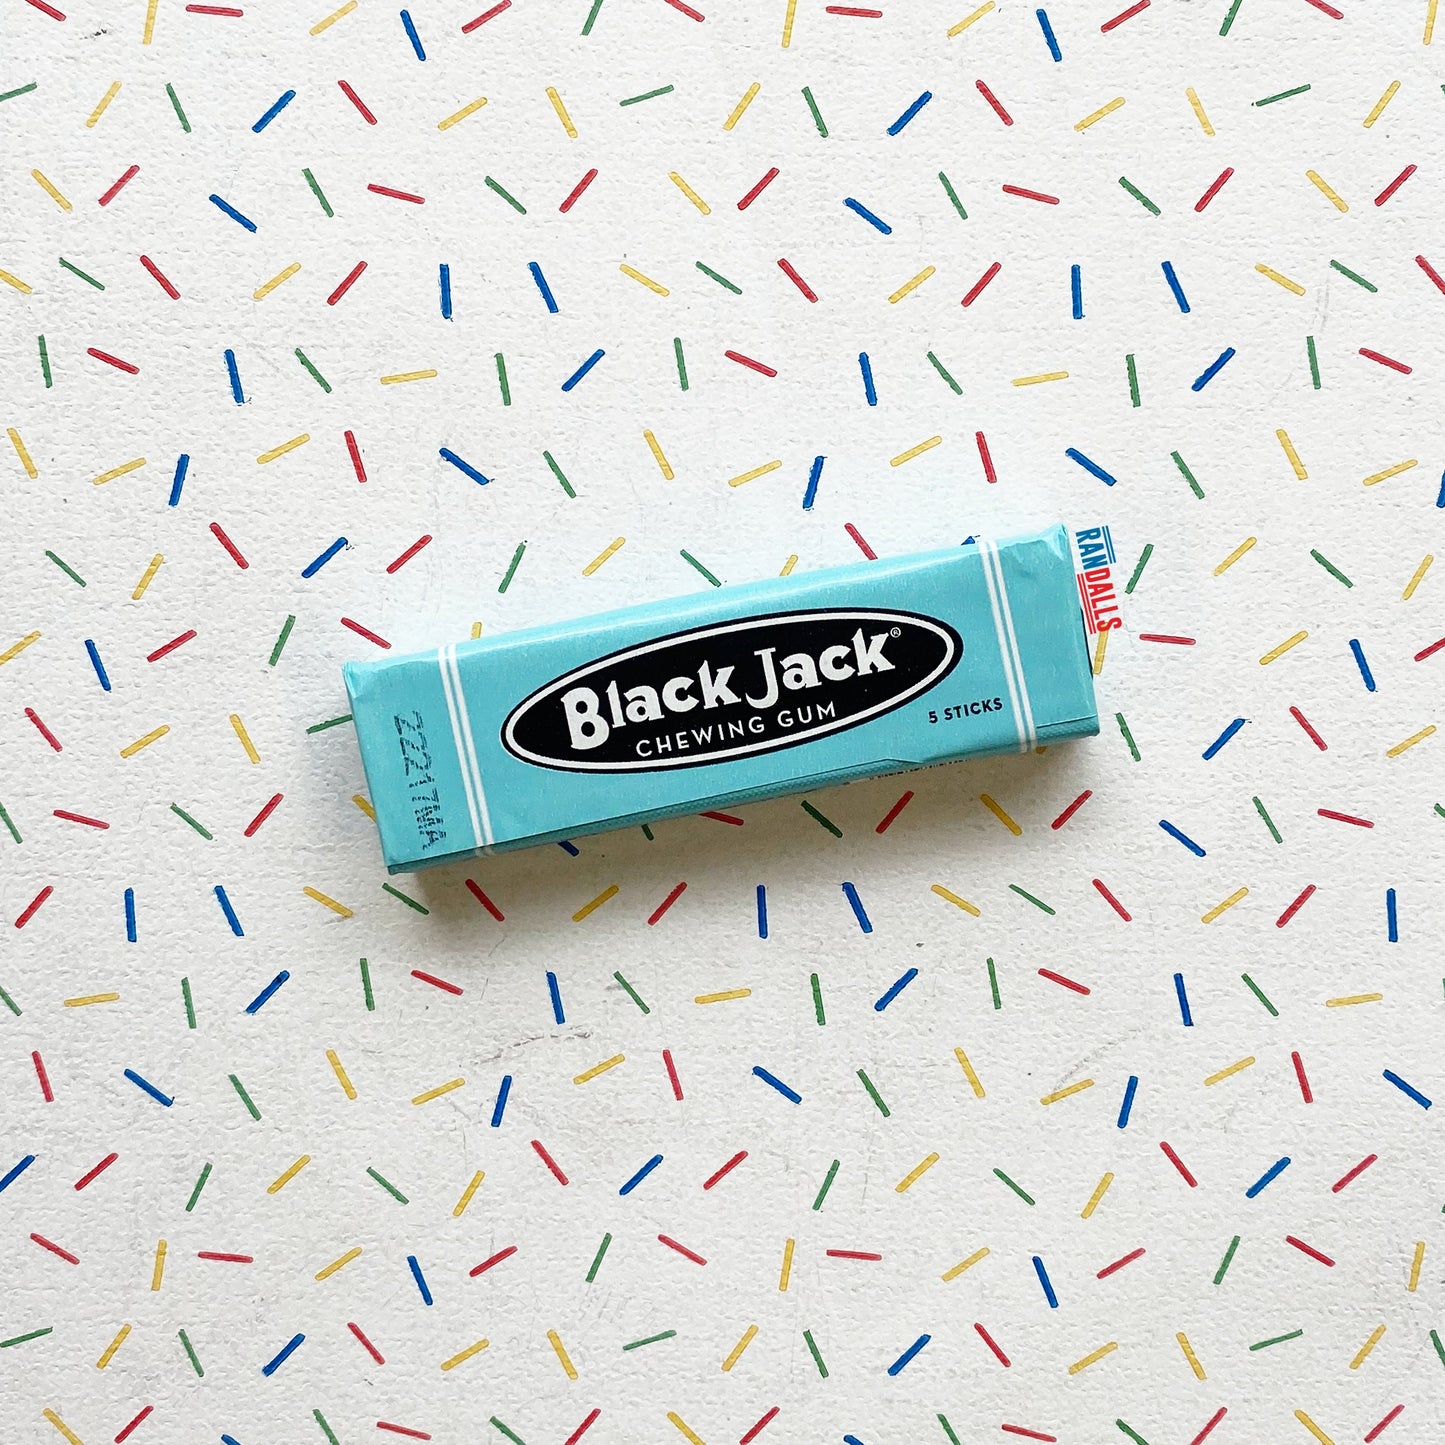 black jack chewing gum, bubblegum, gum, blackjack, licorice, liquorice, aniseed, Black in colour this delicious aniseed flavour chewing gum has five sticks in each pack and is perfect for popping in your pocket, bag or car for a refreshing treat on the go, usa, randalls,